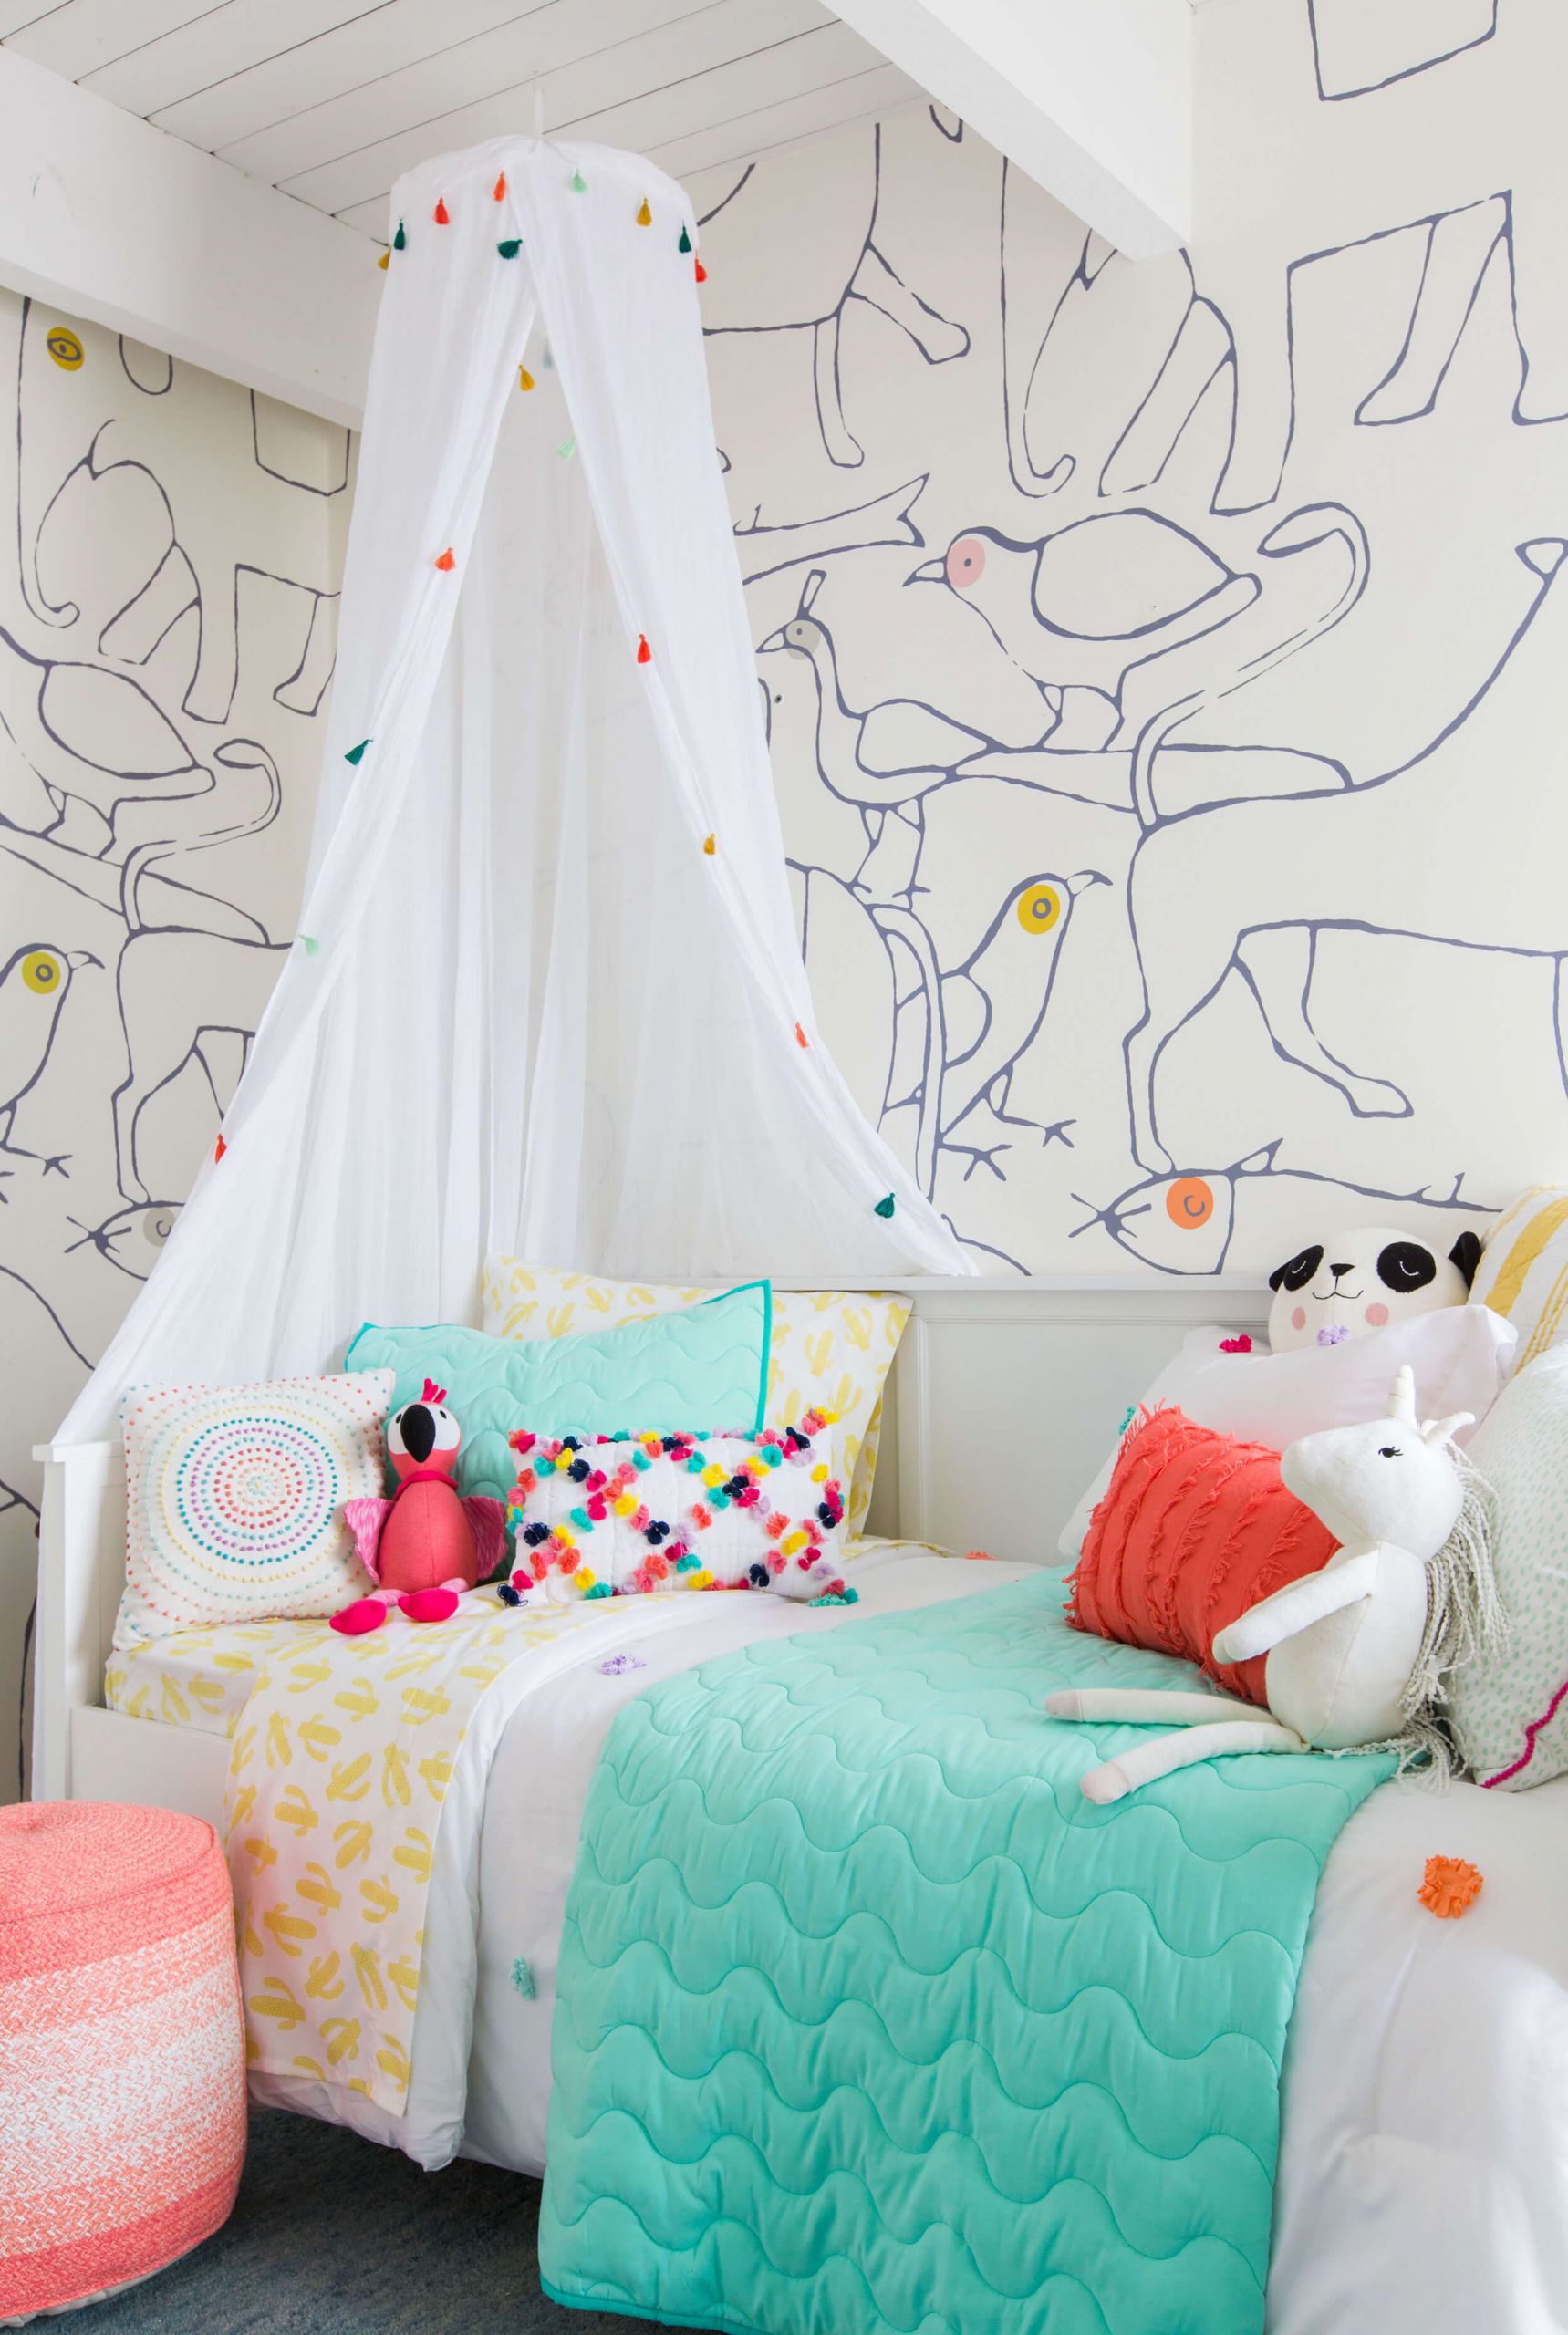 Kids Room Bedding
 Charlie s big kid Room Styled to Sell Emily Henderson